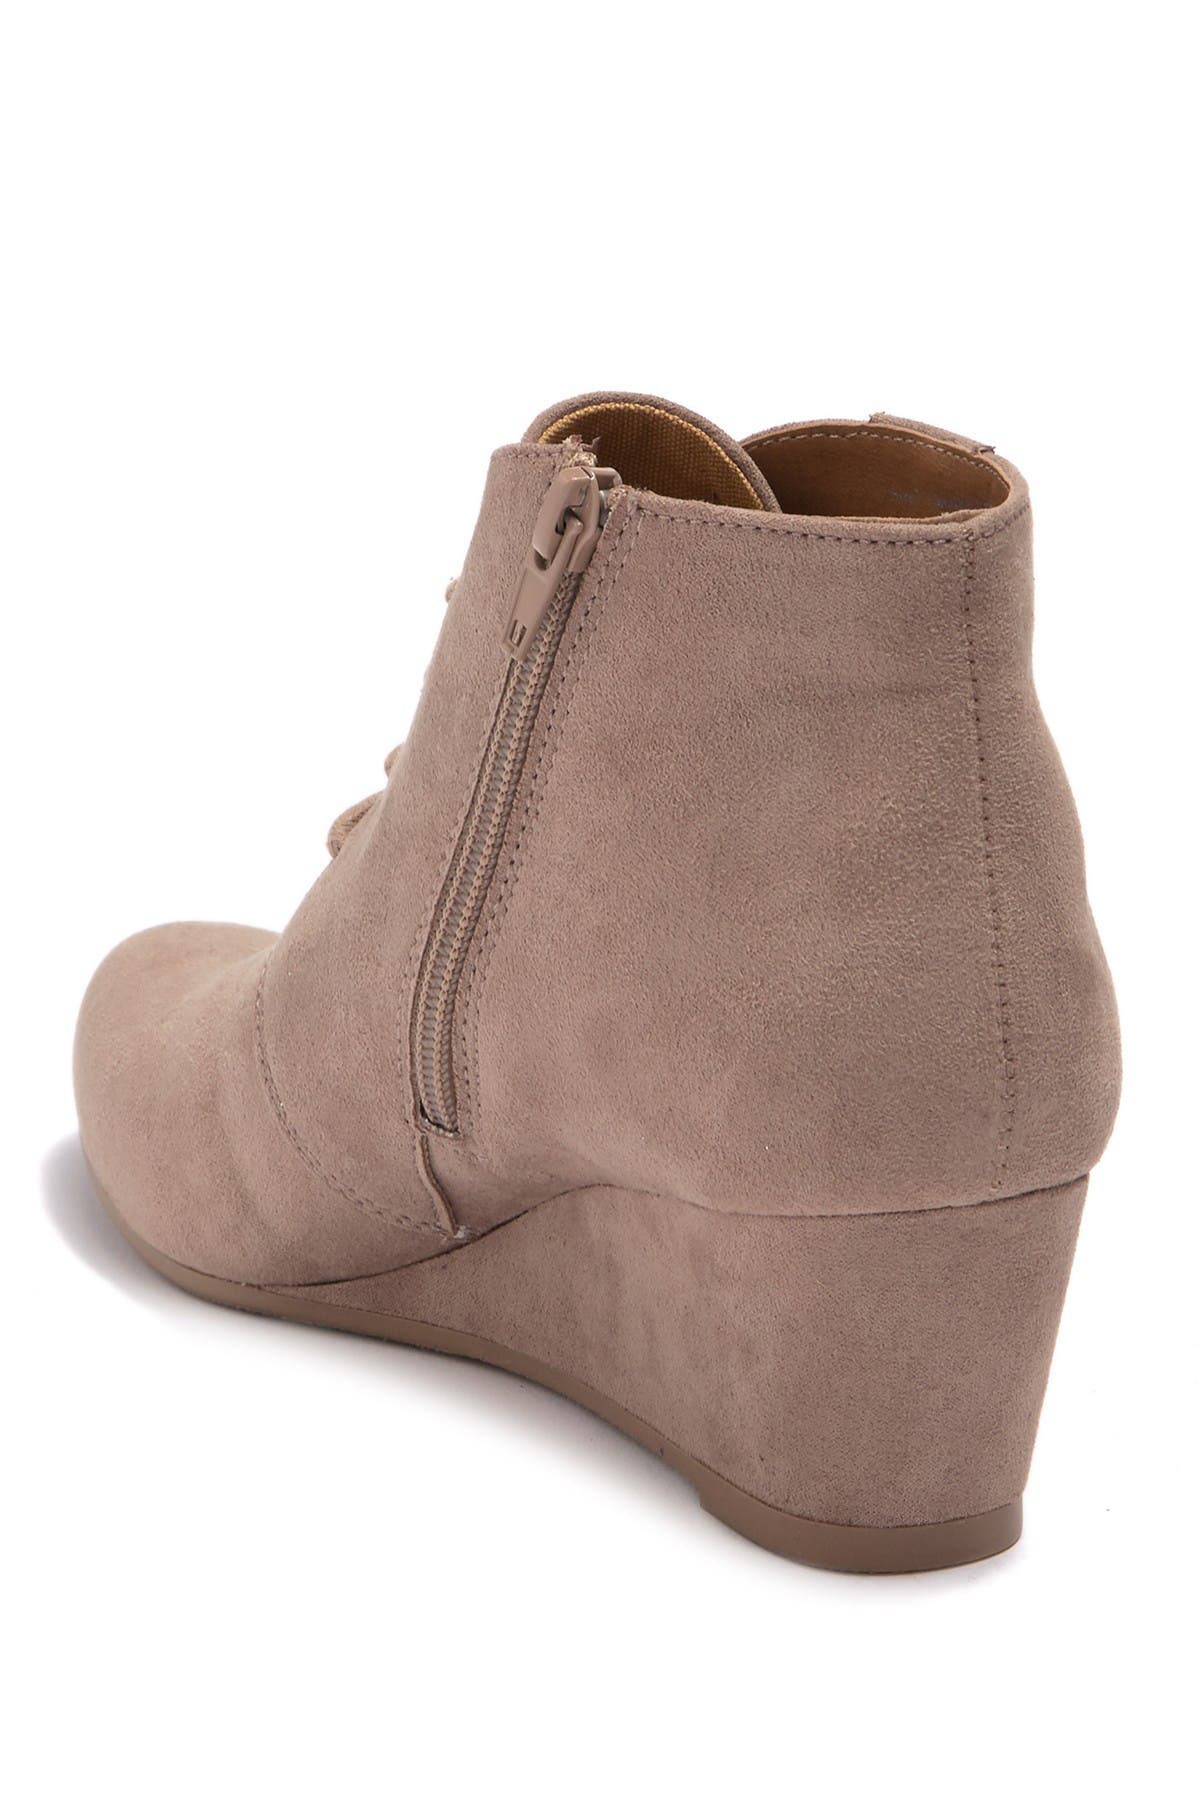 dv8 shoes booties